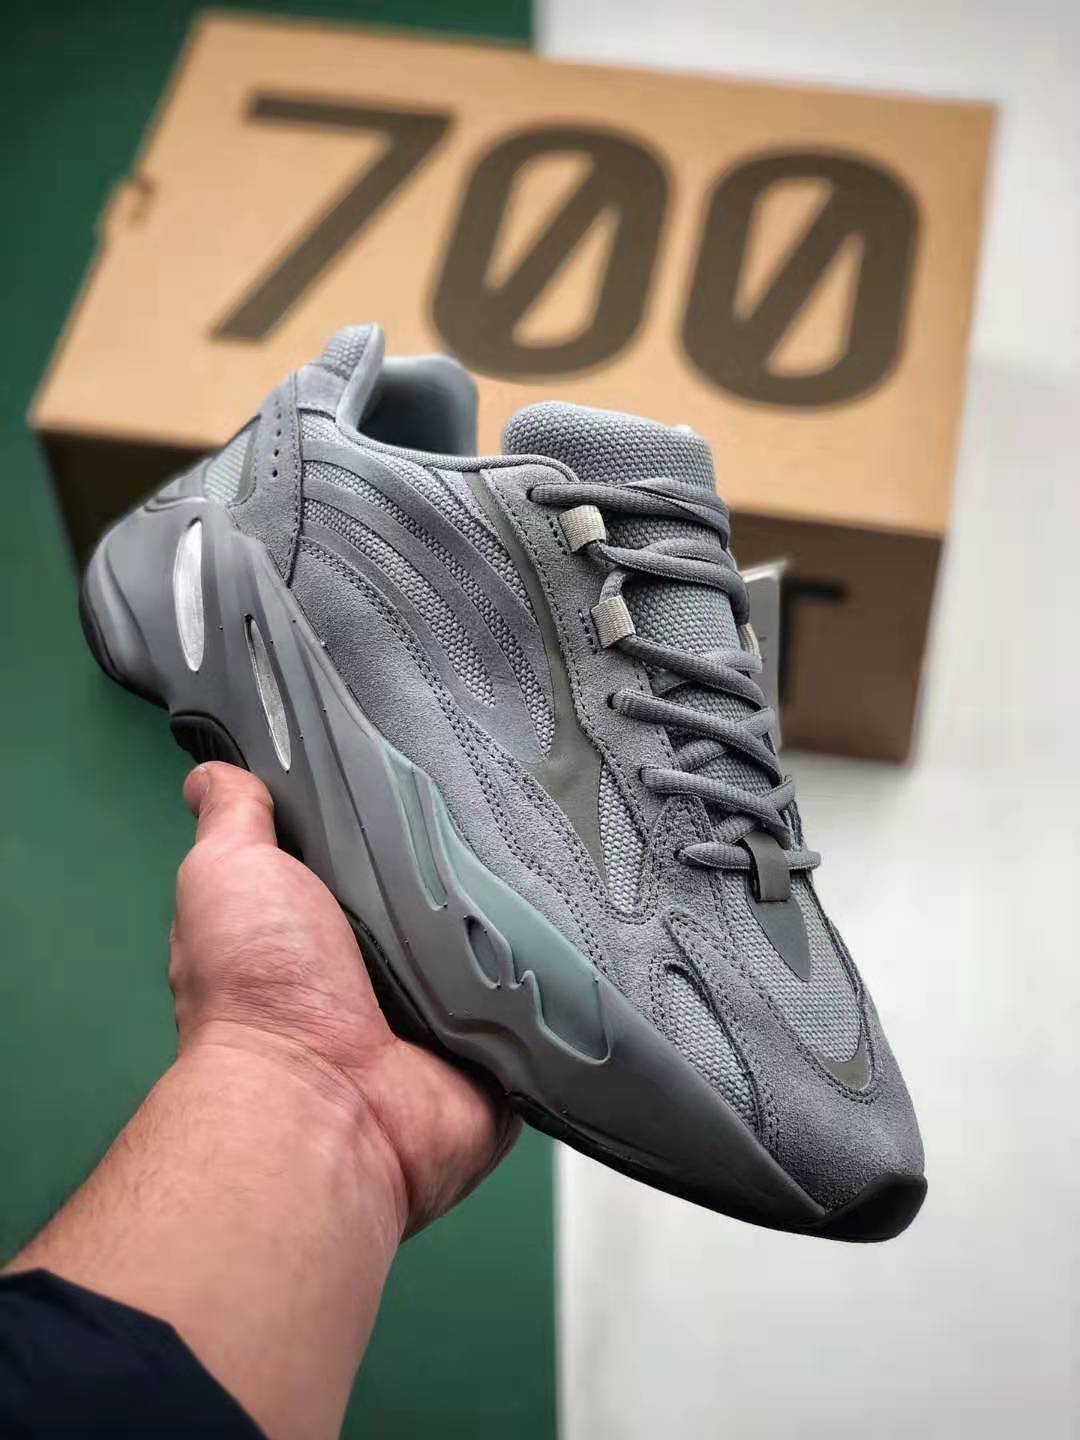 Adidas Yeezy Boost 700 V2 'Hospital Blue' FV8424 - Shop Now for Ultimate Style & Comfort!